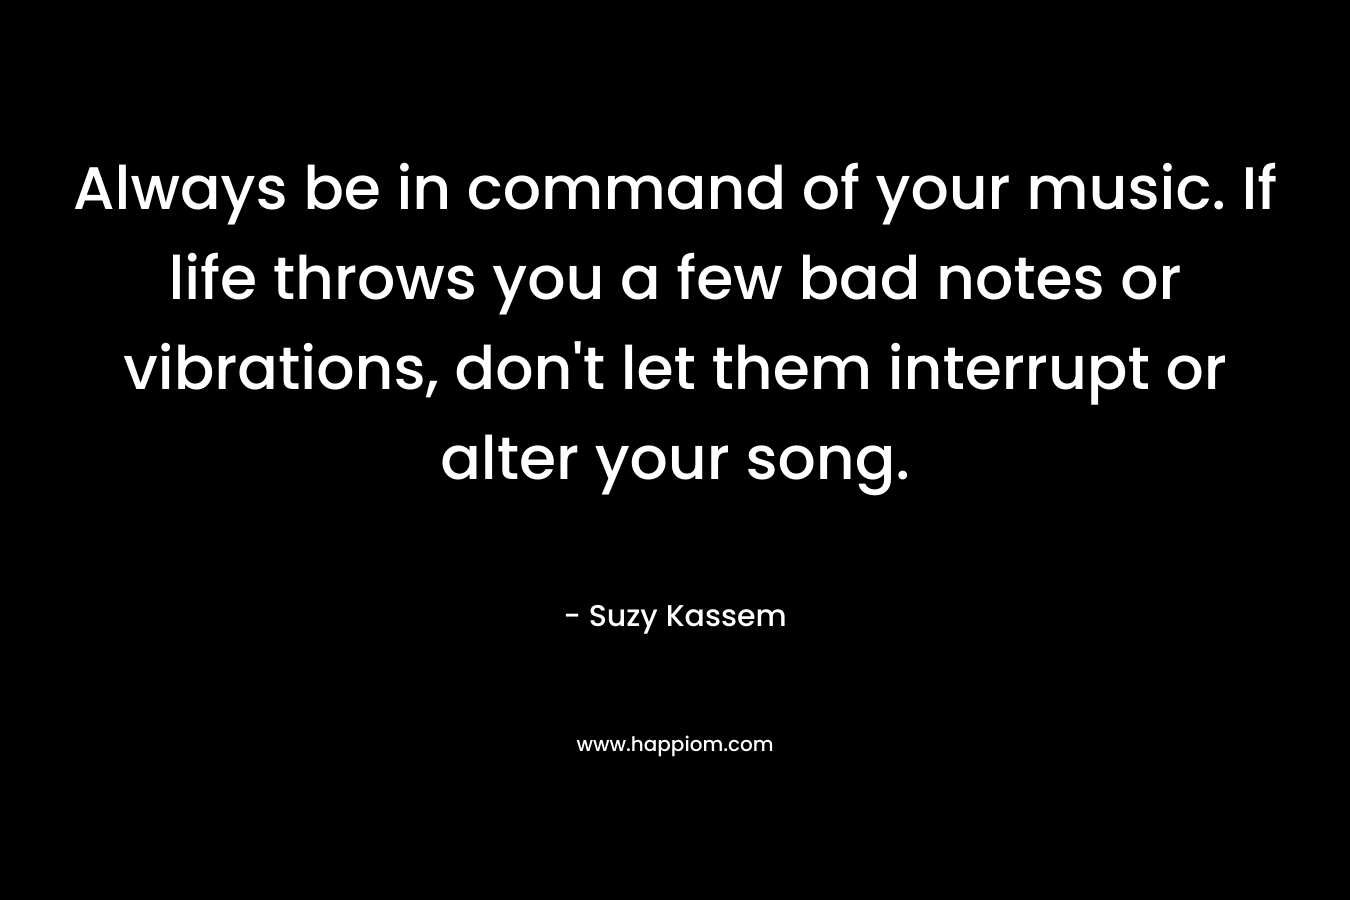 Always be in command of your music. If life throws you a few bad notes or vibrations, don't let them interrupt or alter your song.